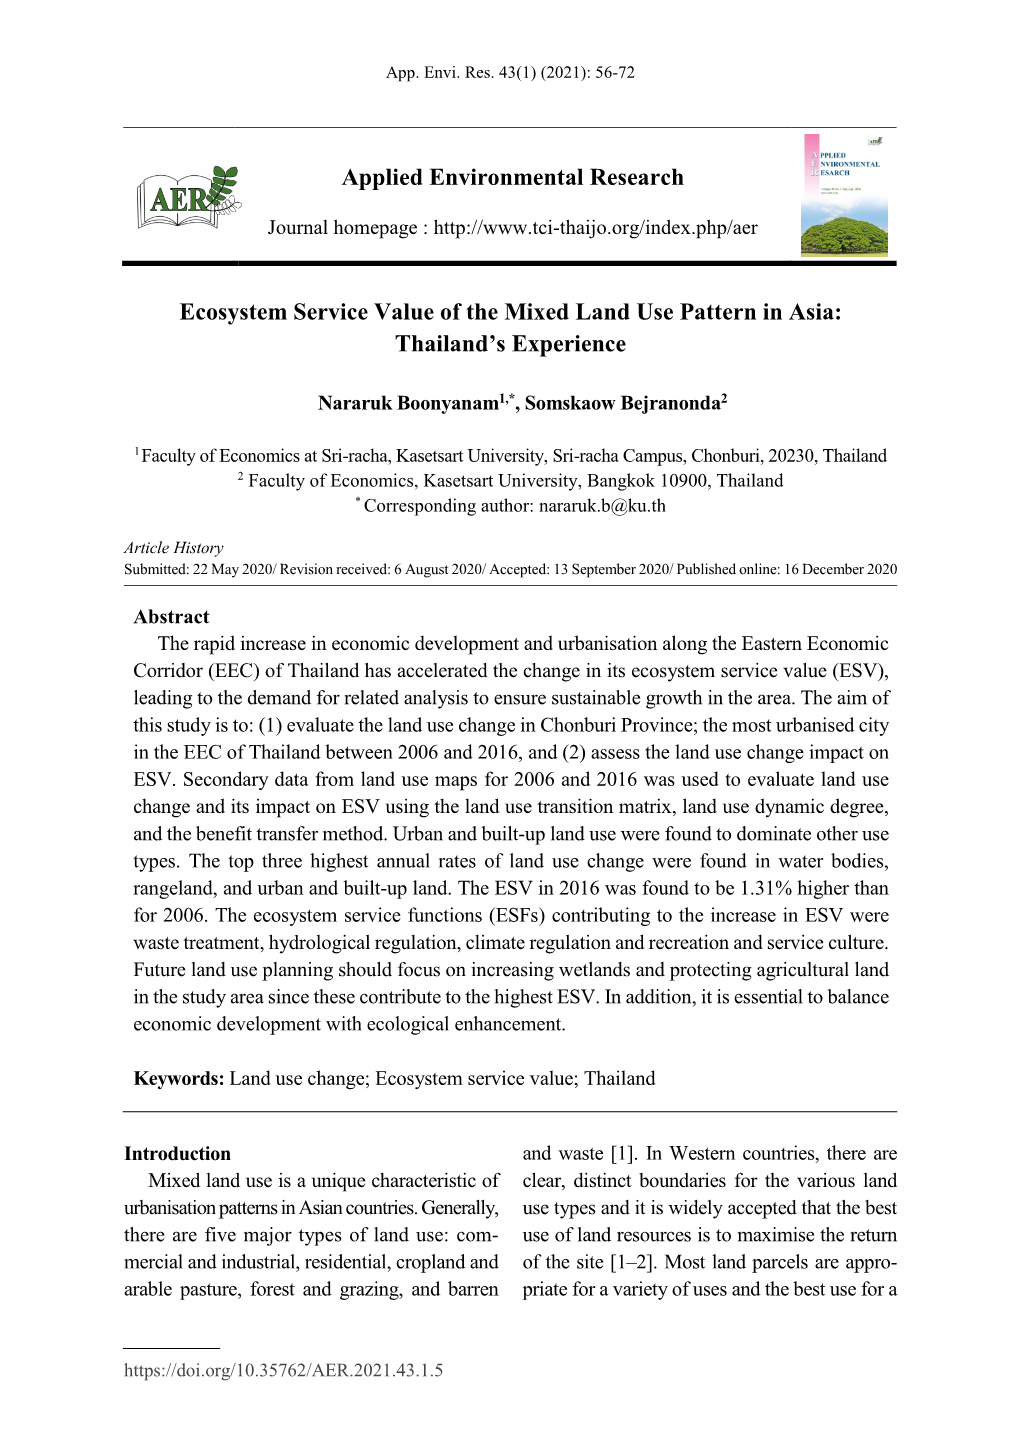 Ecosystem Service Value of the Mixed Land Use Pattern in Asia: Thailand's Experience Applied Environmental Research